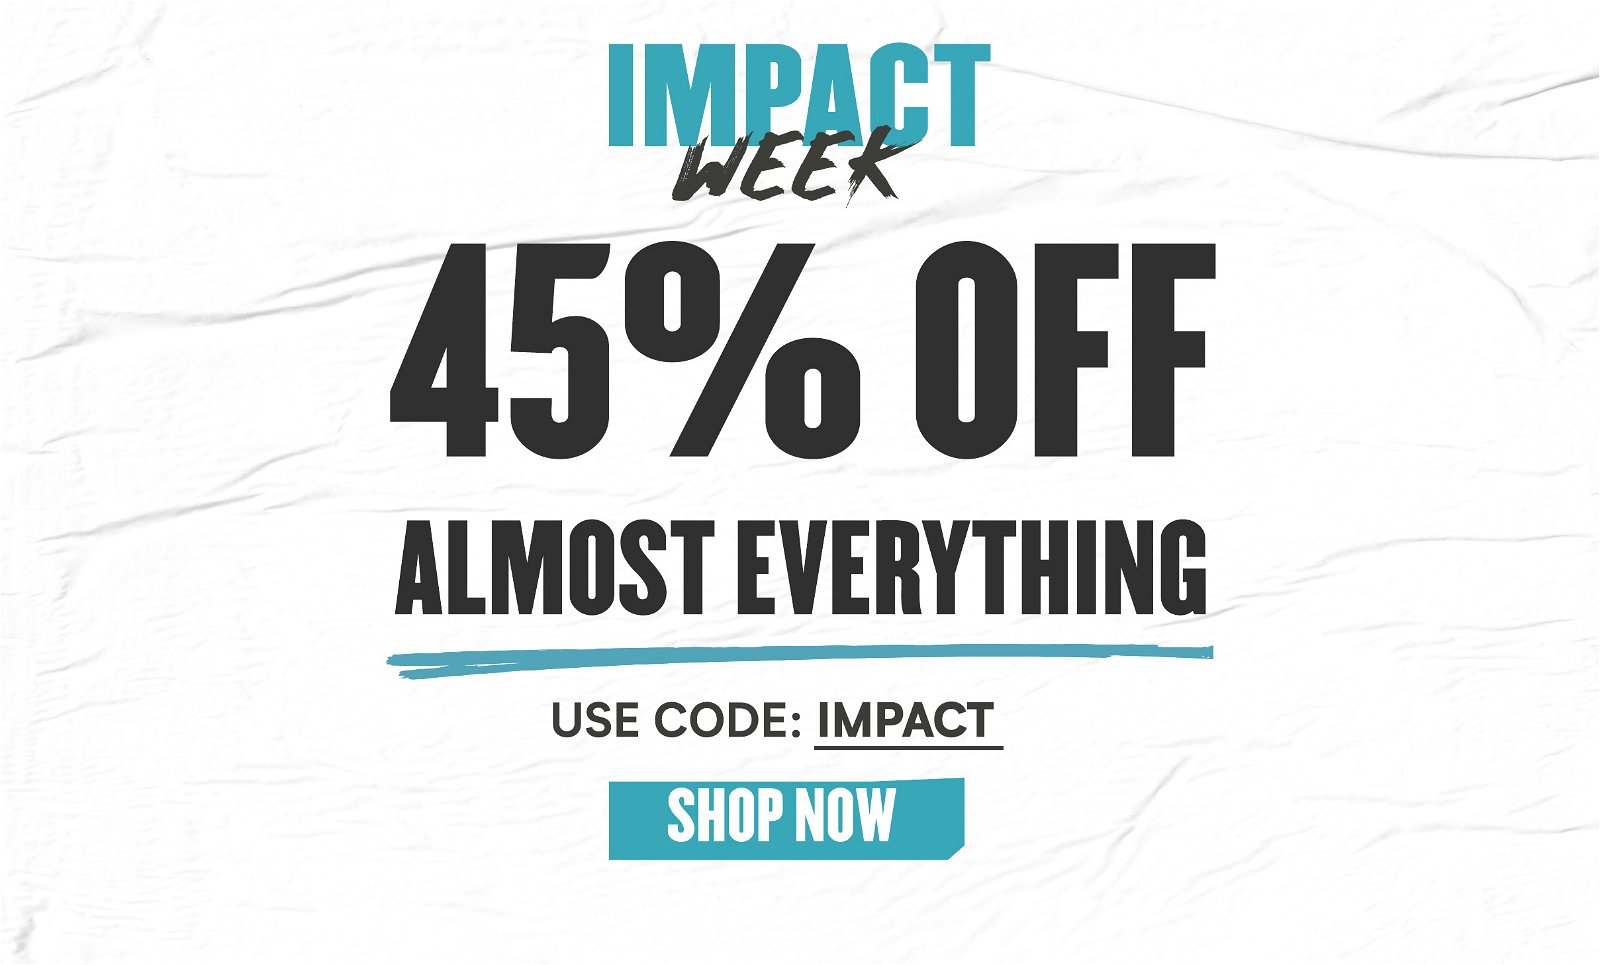 Impact Week 45% off Almost Everything